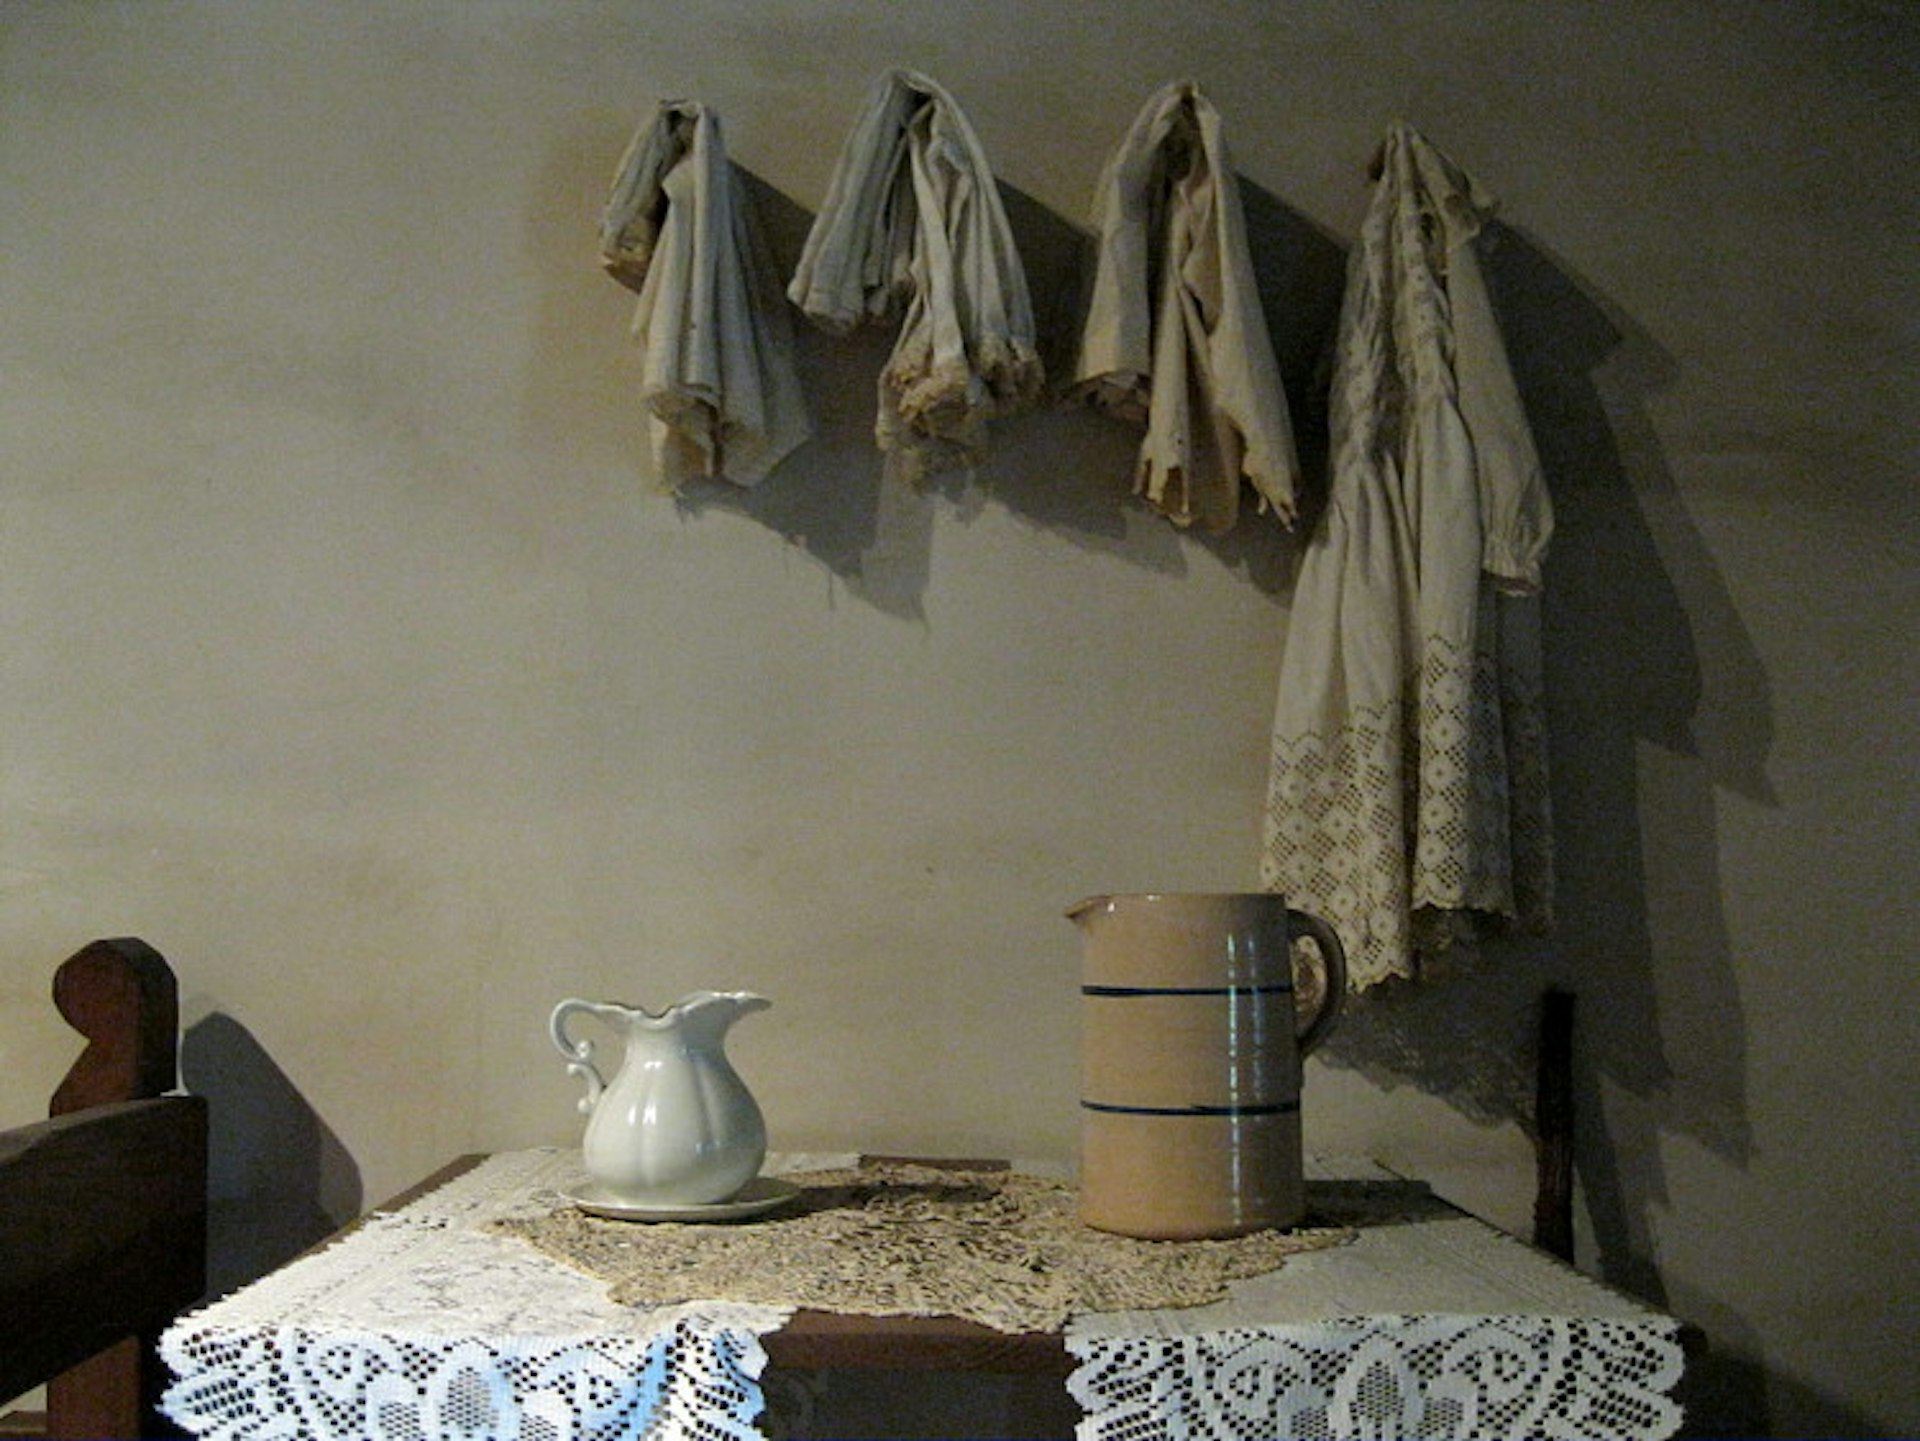 Interior of Avila Adobe, the oldest building in Los Angeles. Image by Andy Bender / Lonely Planet